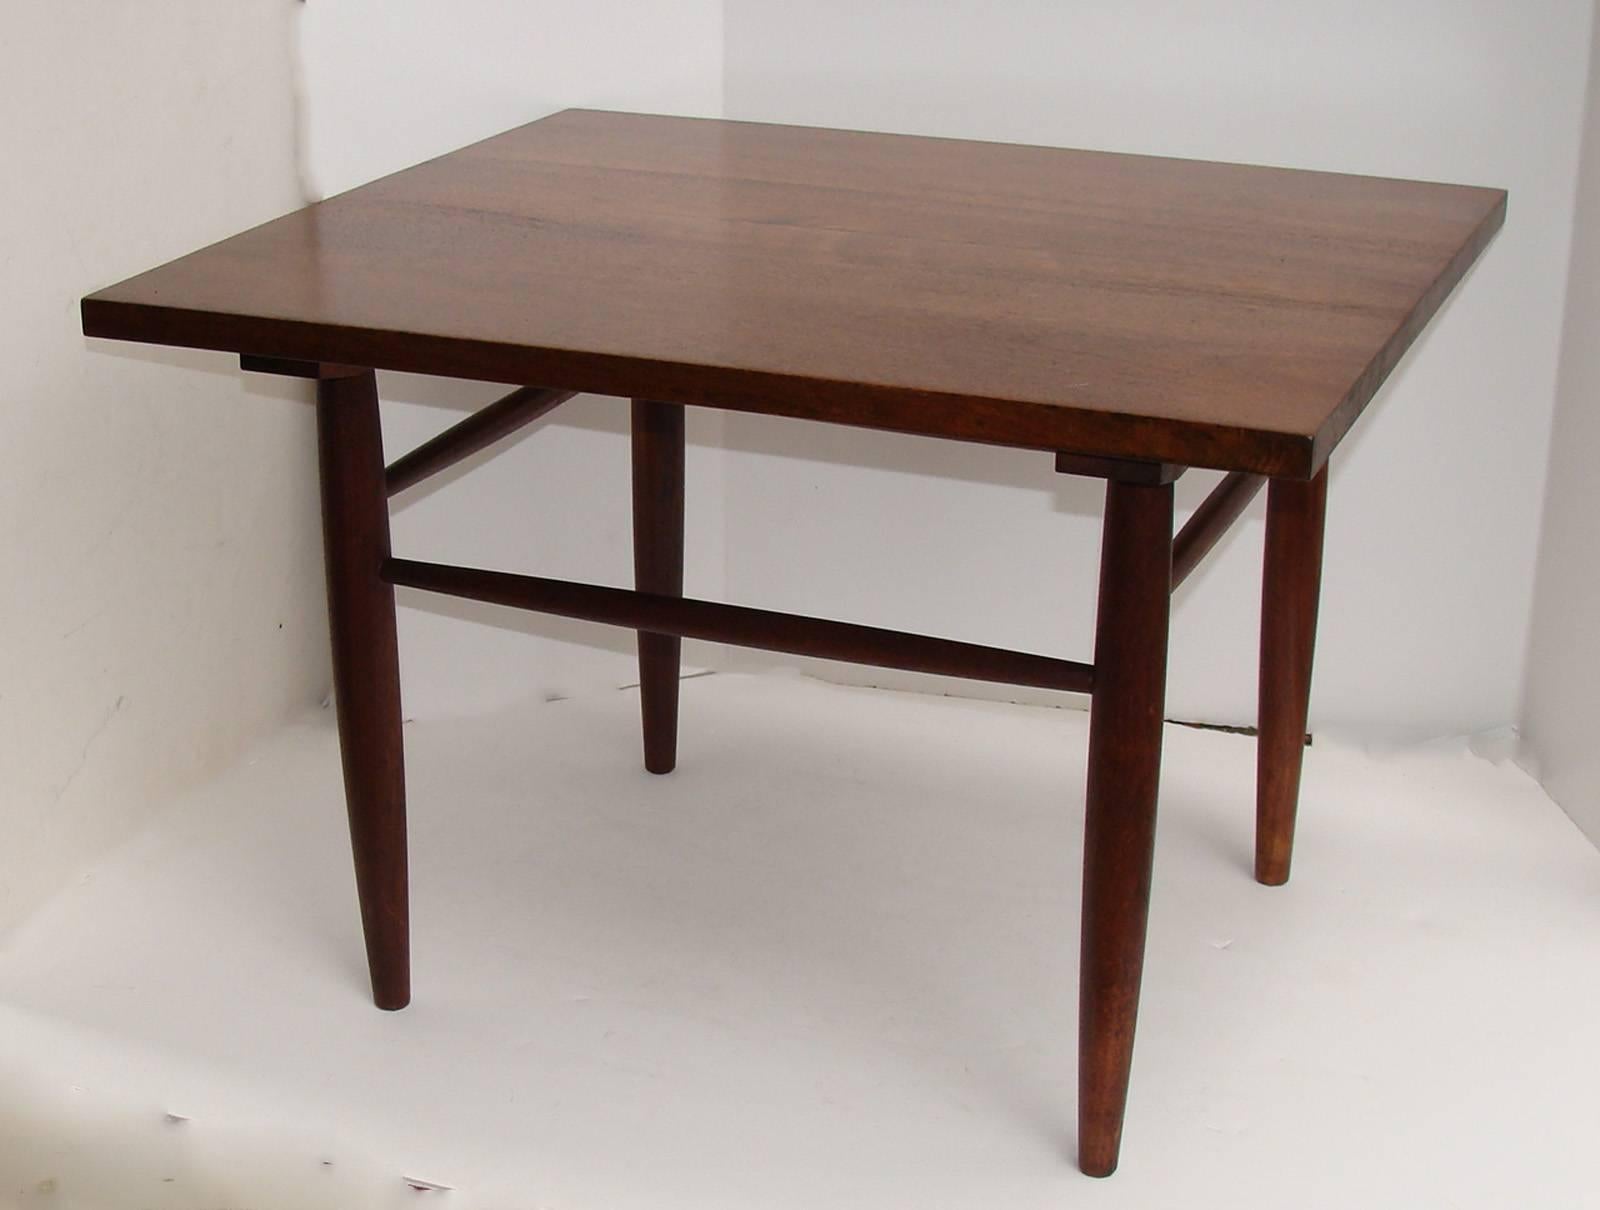 Low table crafted by James Martin, New Hope PA woodworker. Excellent as a small coffee table or side table.

Apprenticed with George Nakashima prior to opening his own shop in 1963. Martin's pieces are rare in the marketplace. Table made of solid